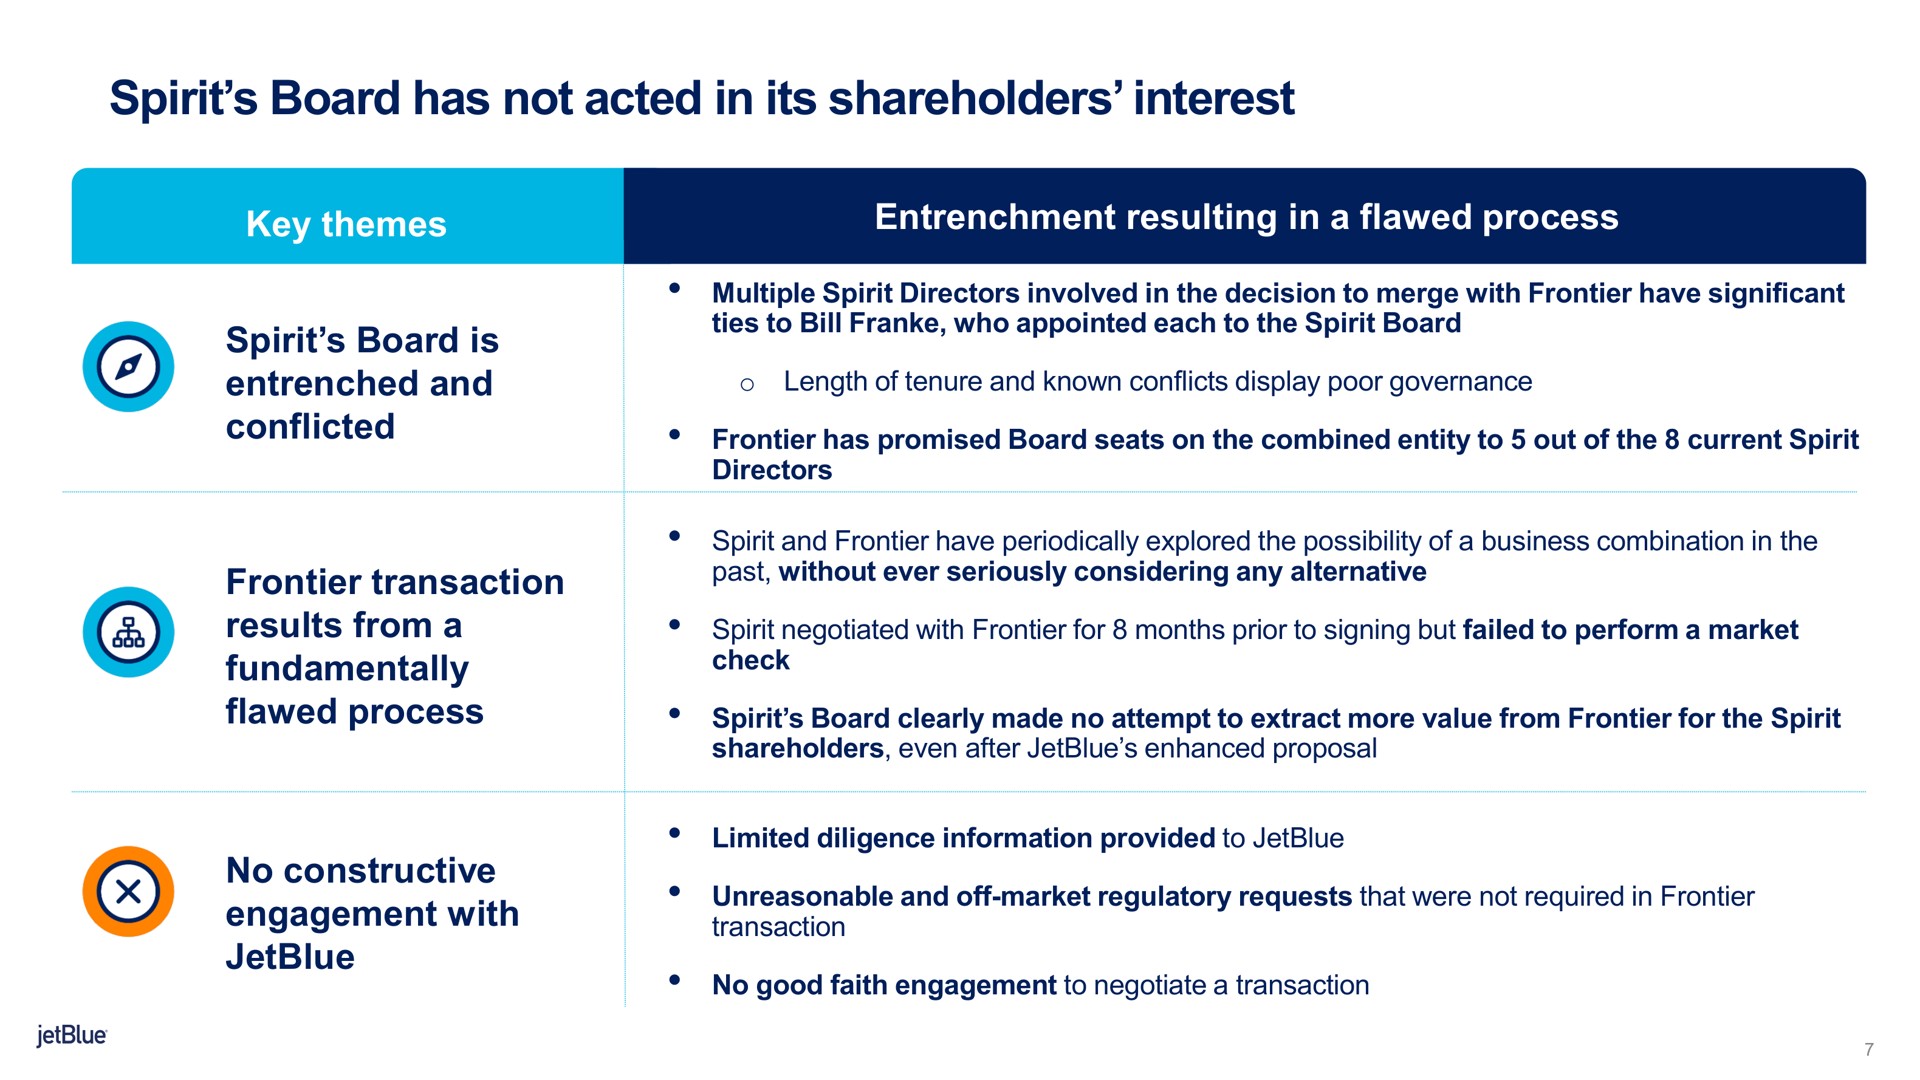 spirit board has not acted in its shareholders interest | jetBlue